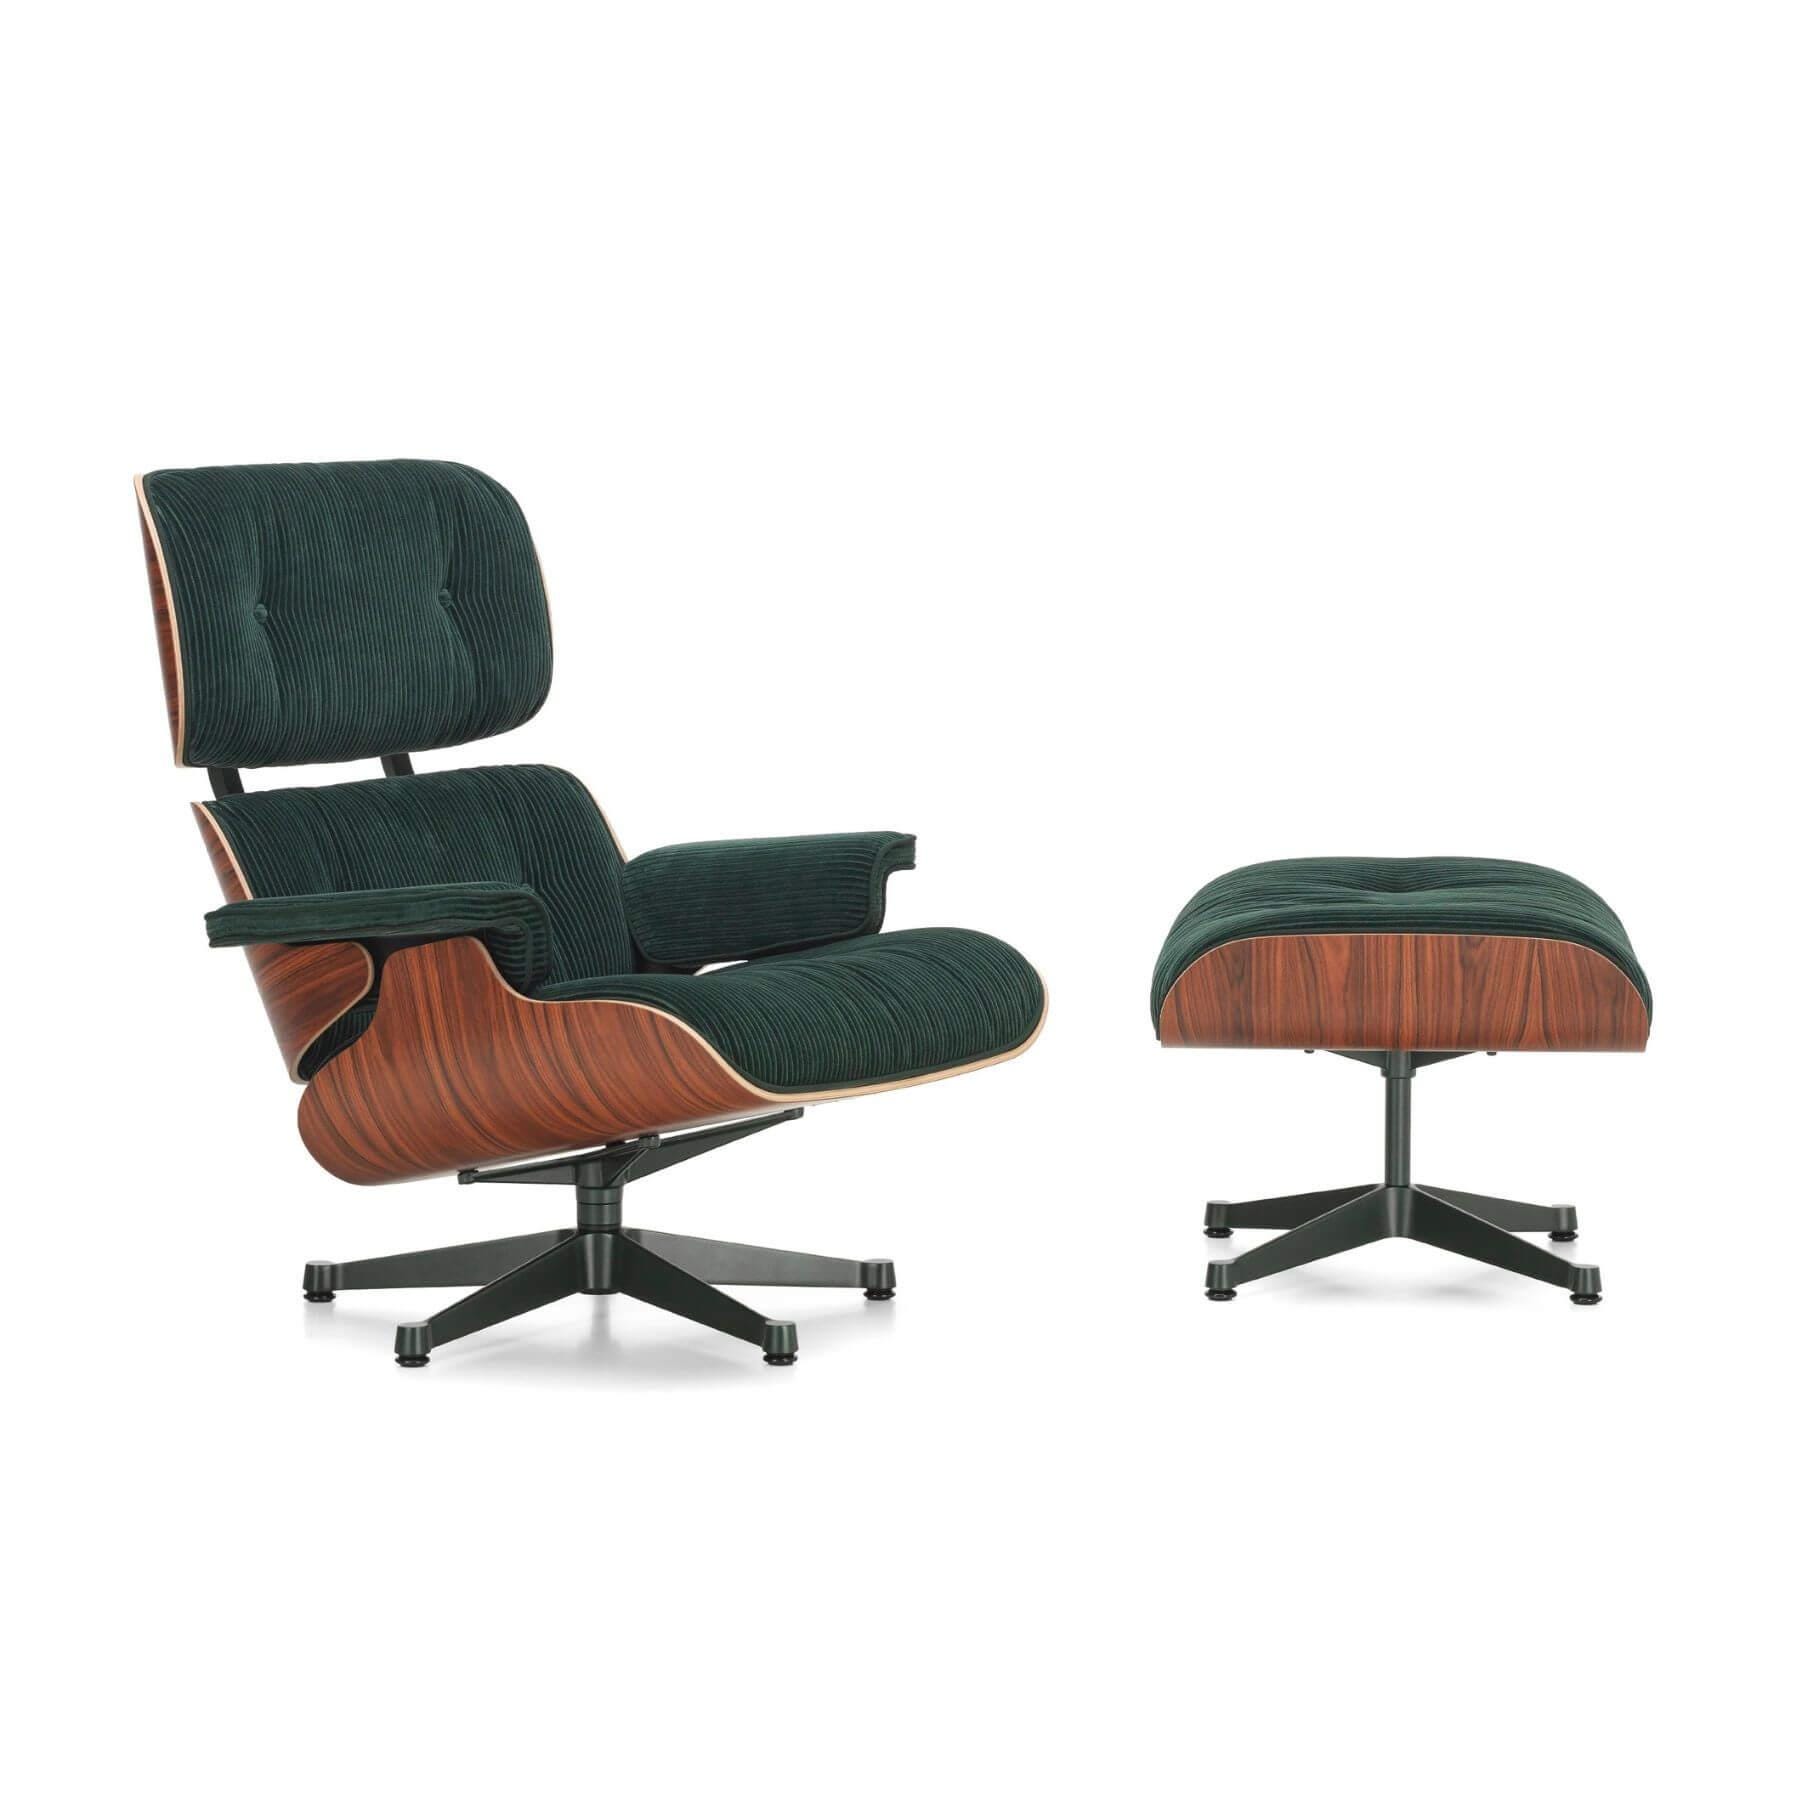 Vitra Eames Lounge Chair Ottoman Kvadrat Phlox Fabric Special Edition Green Designer Furniture From Holloways Of Ludlow